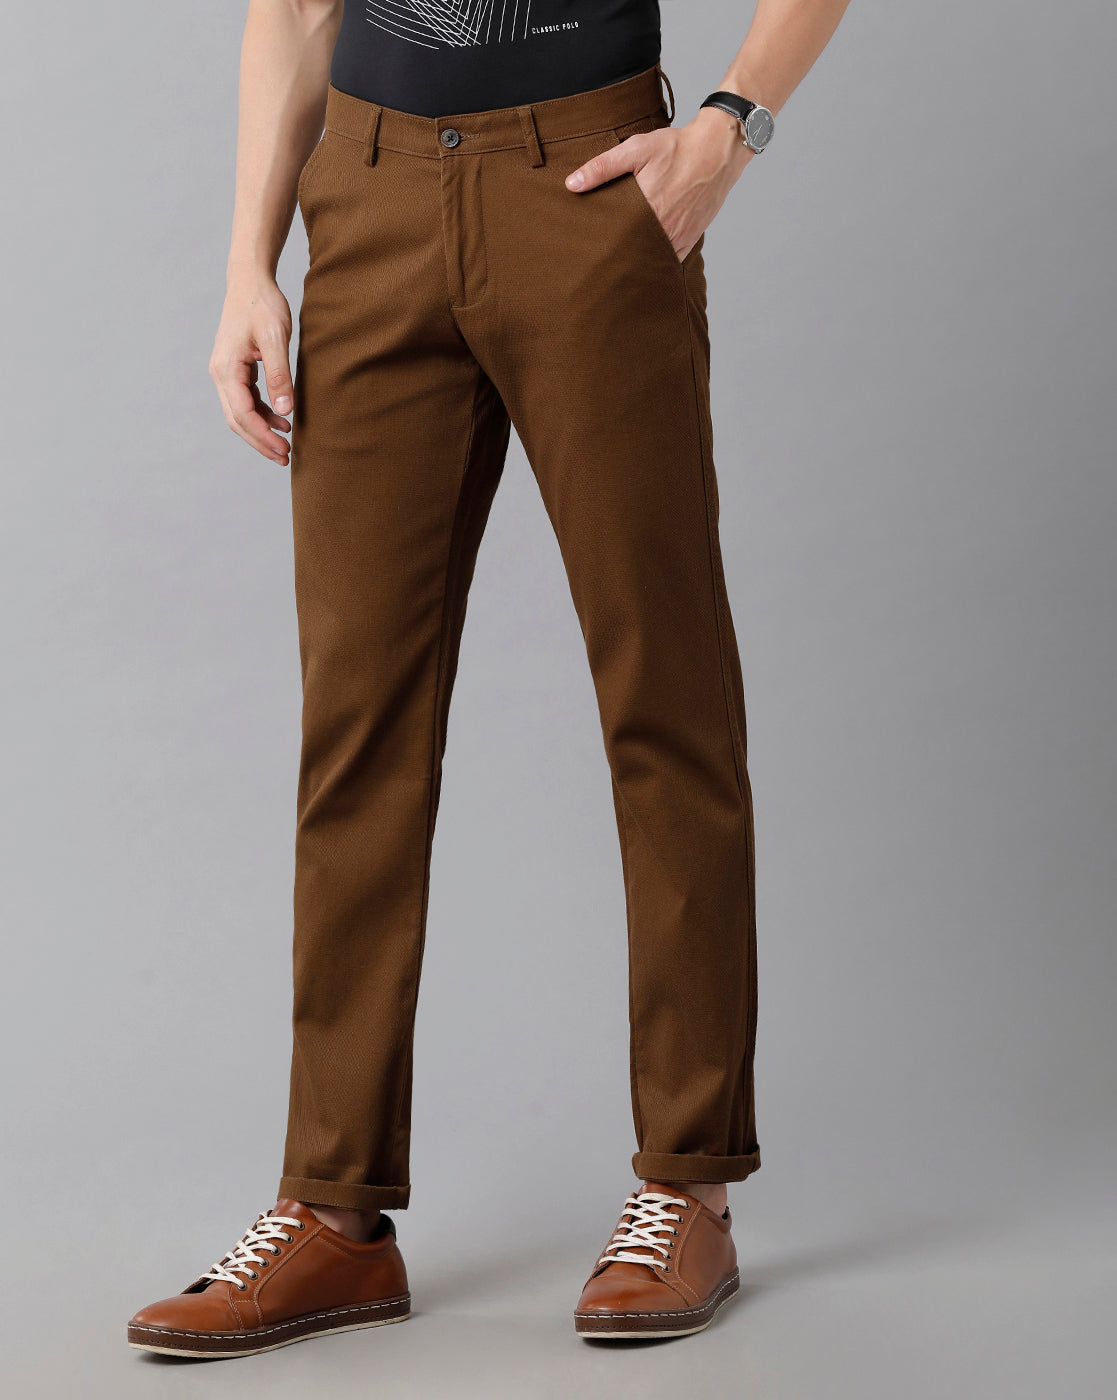 Buy online Beige Cotton Flat Front Casual Trousers from Bottom Wear for Men  by Classic Polo for 1899 at 5 off  2023 Limeroadcom